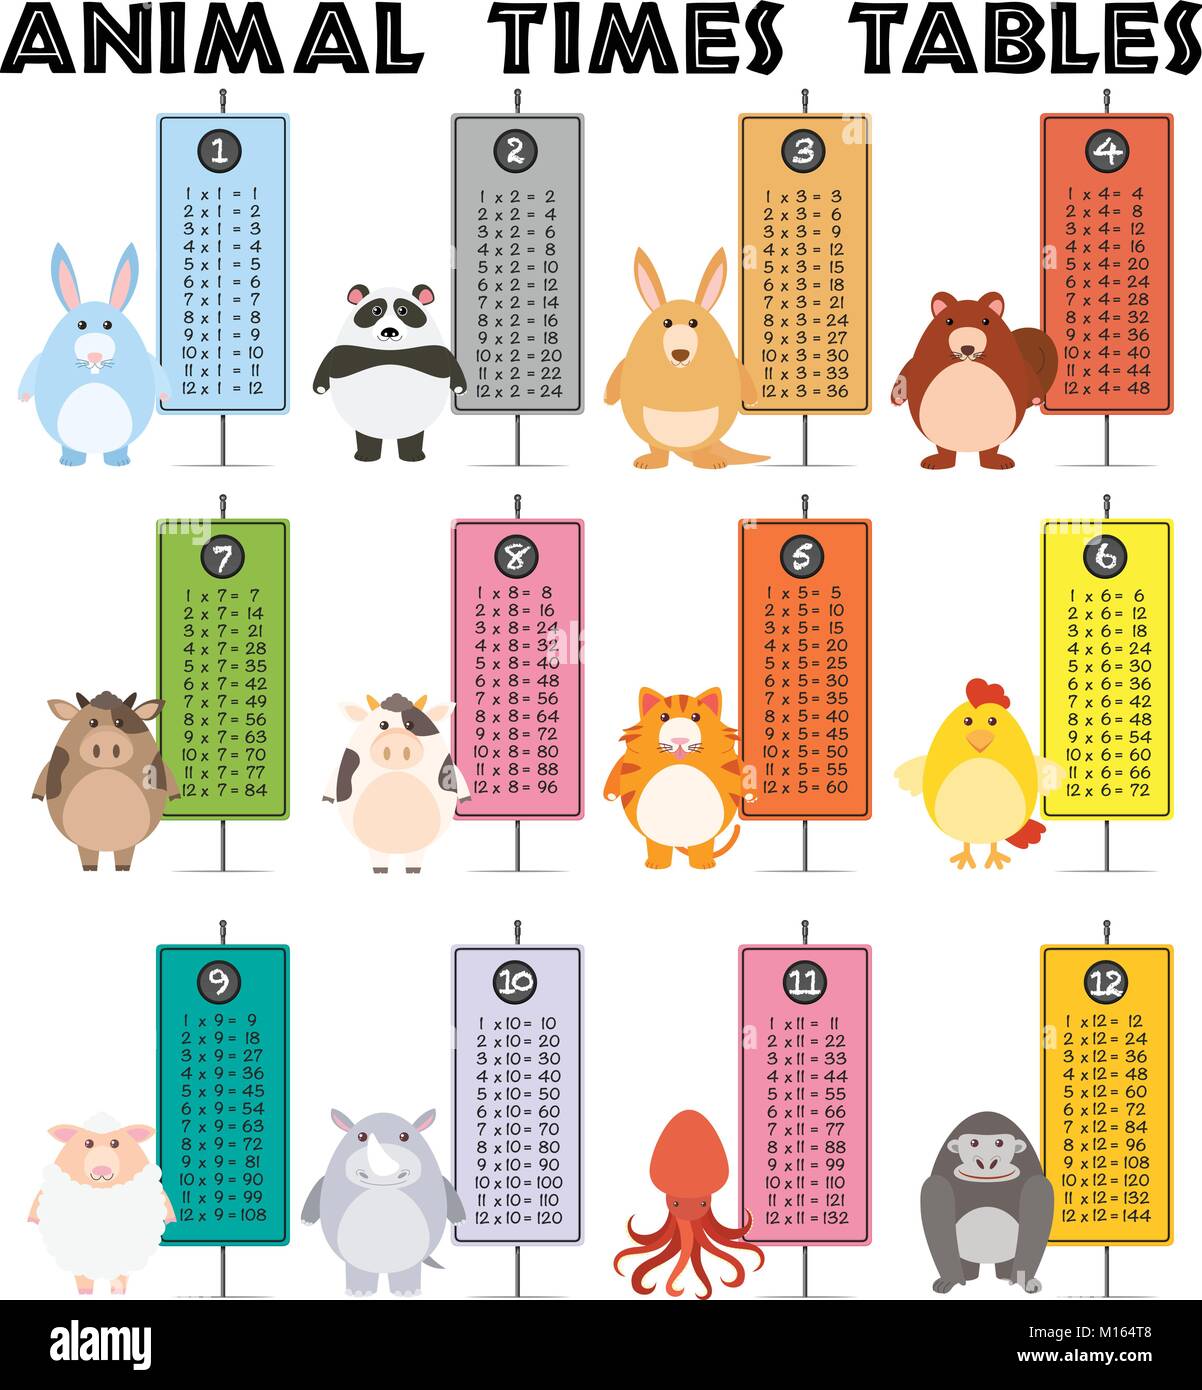 Animal times table on white background illustration Stock Vector